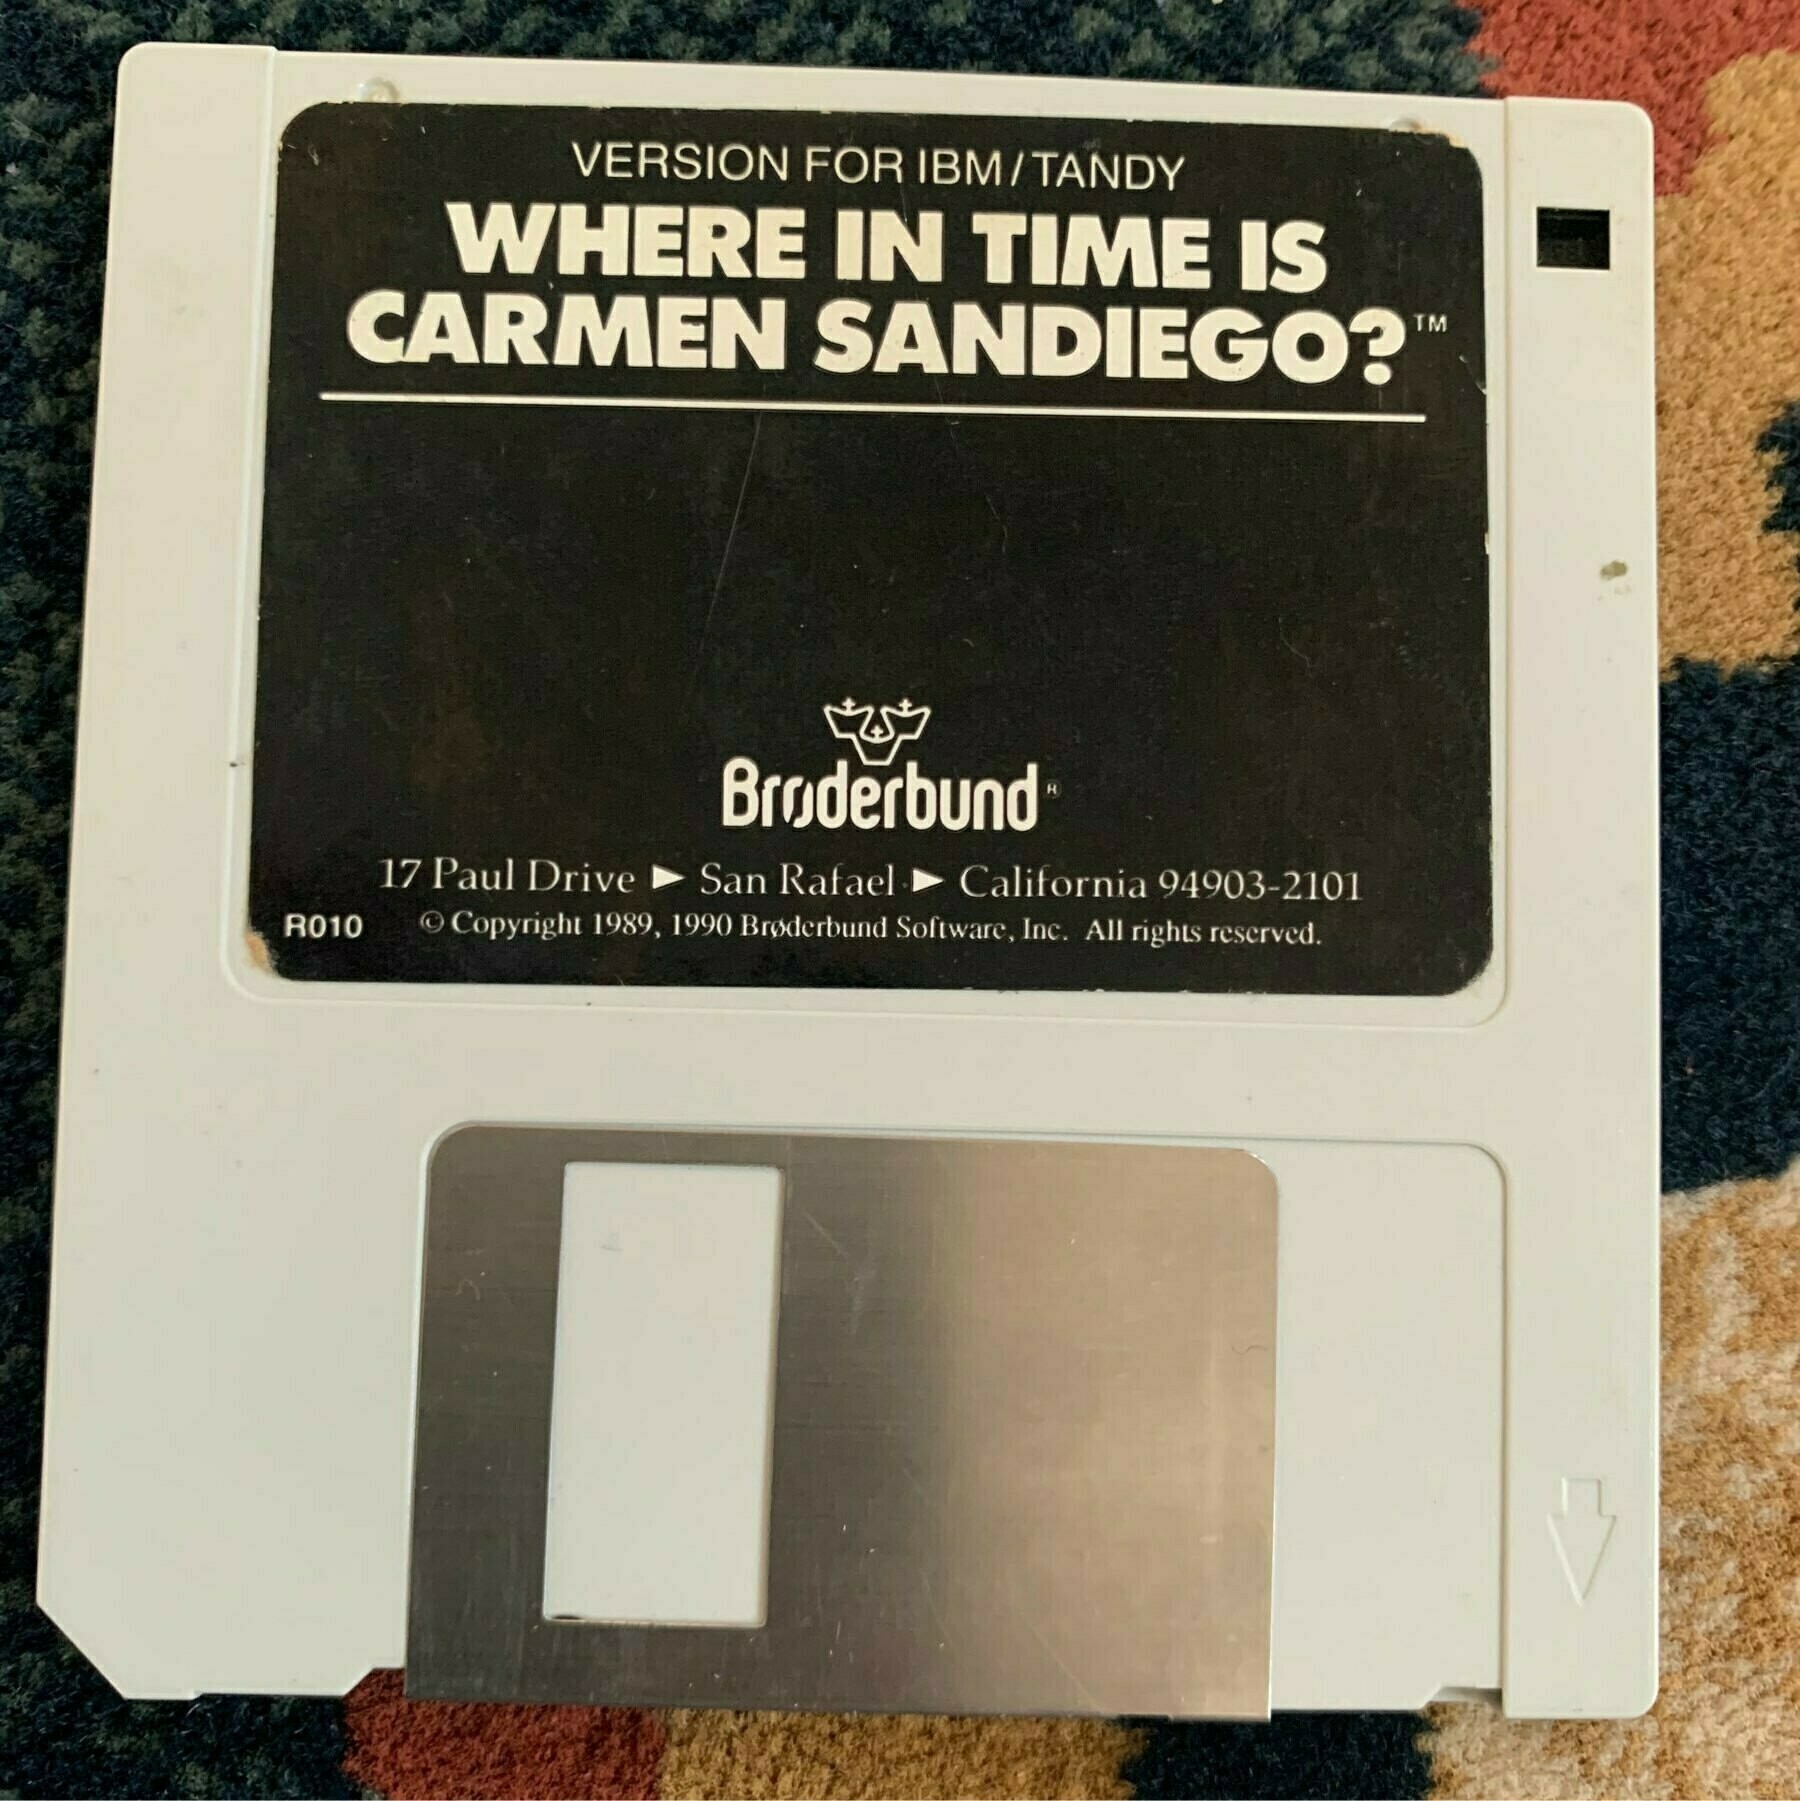 The floppy disk for Where in Time is Carmen Sandiego